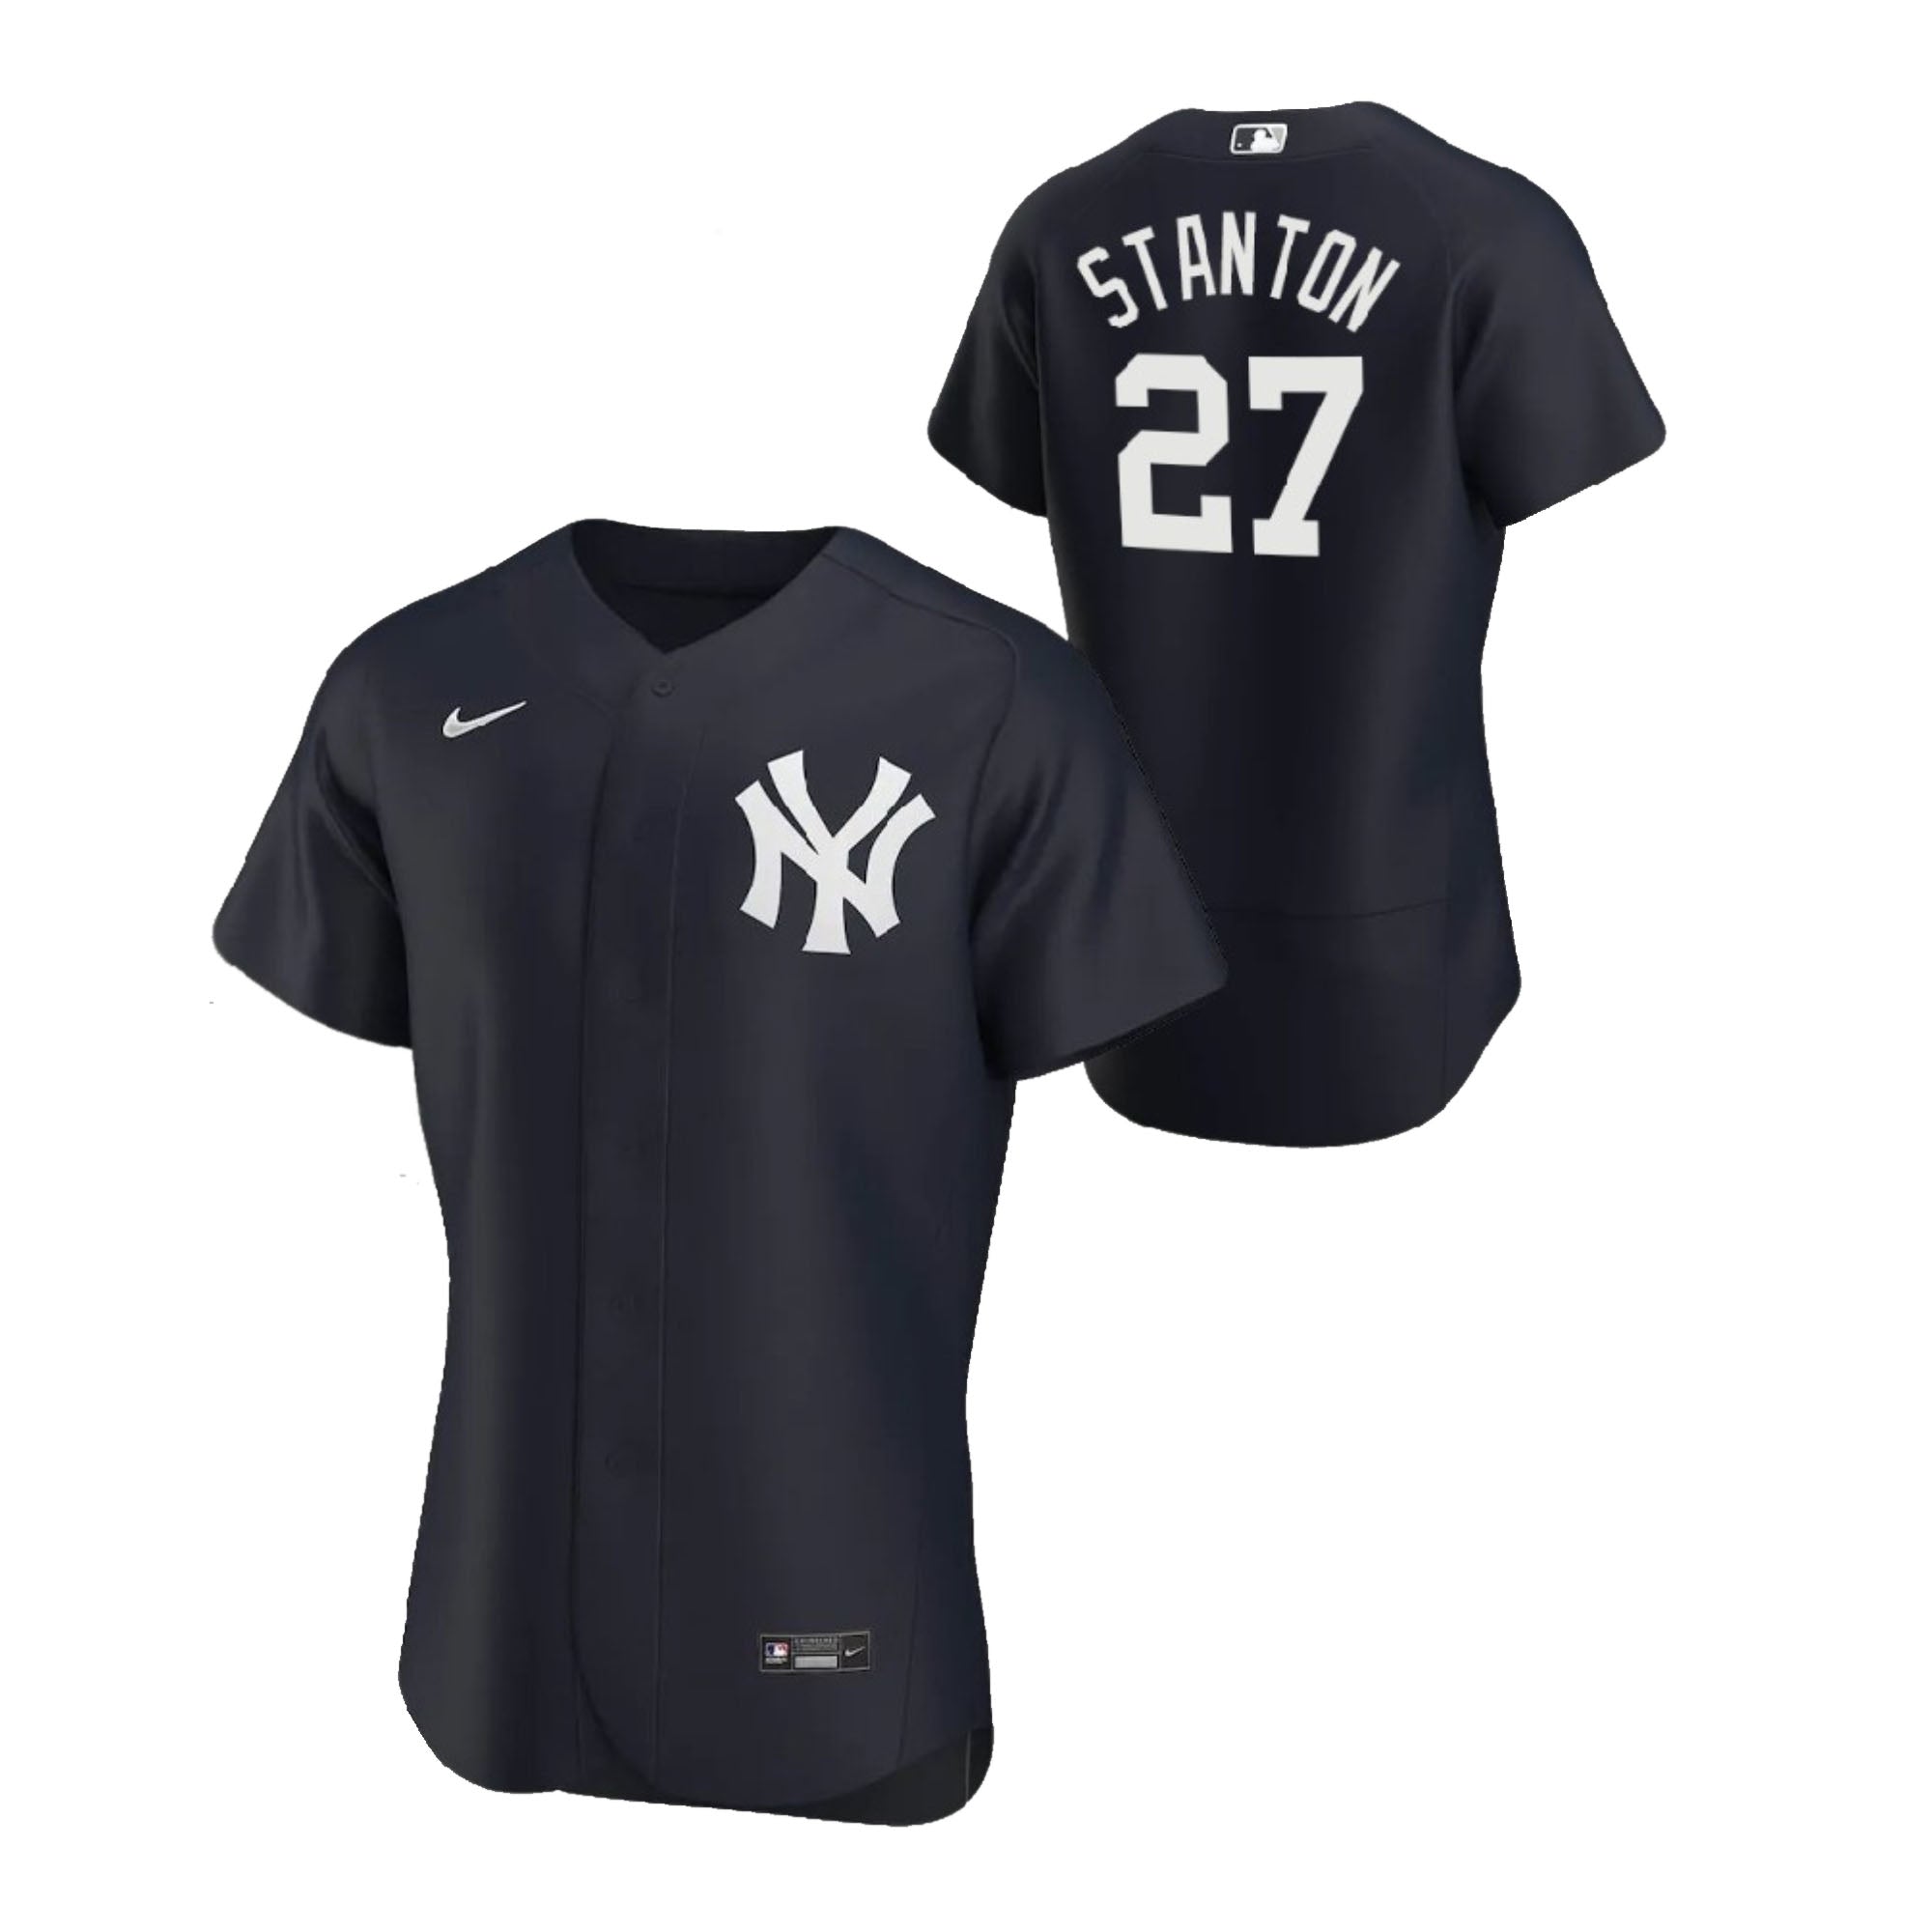 Outerstuff Giancarlo Stanton New York Yankees #27 Youth Player Name and Number Jersey T-Shirt 